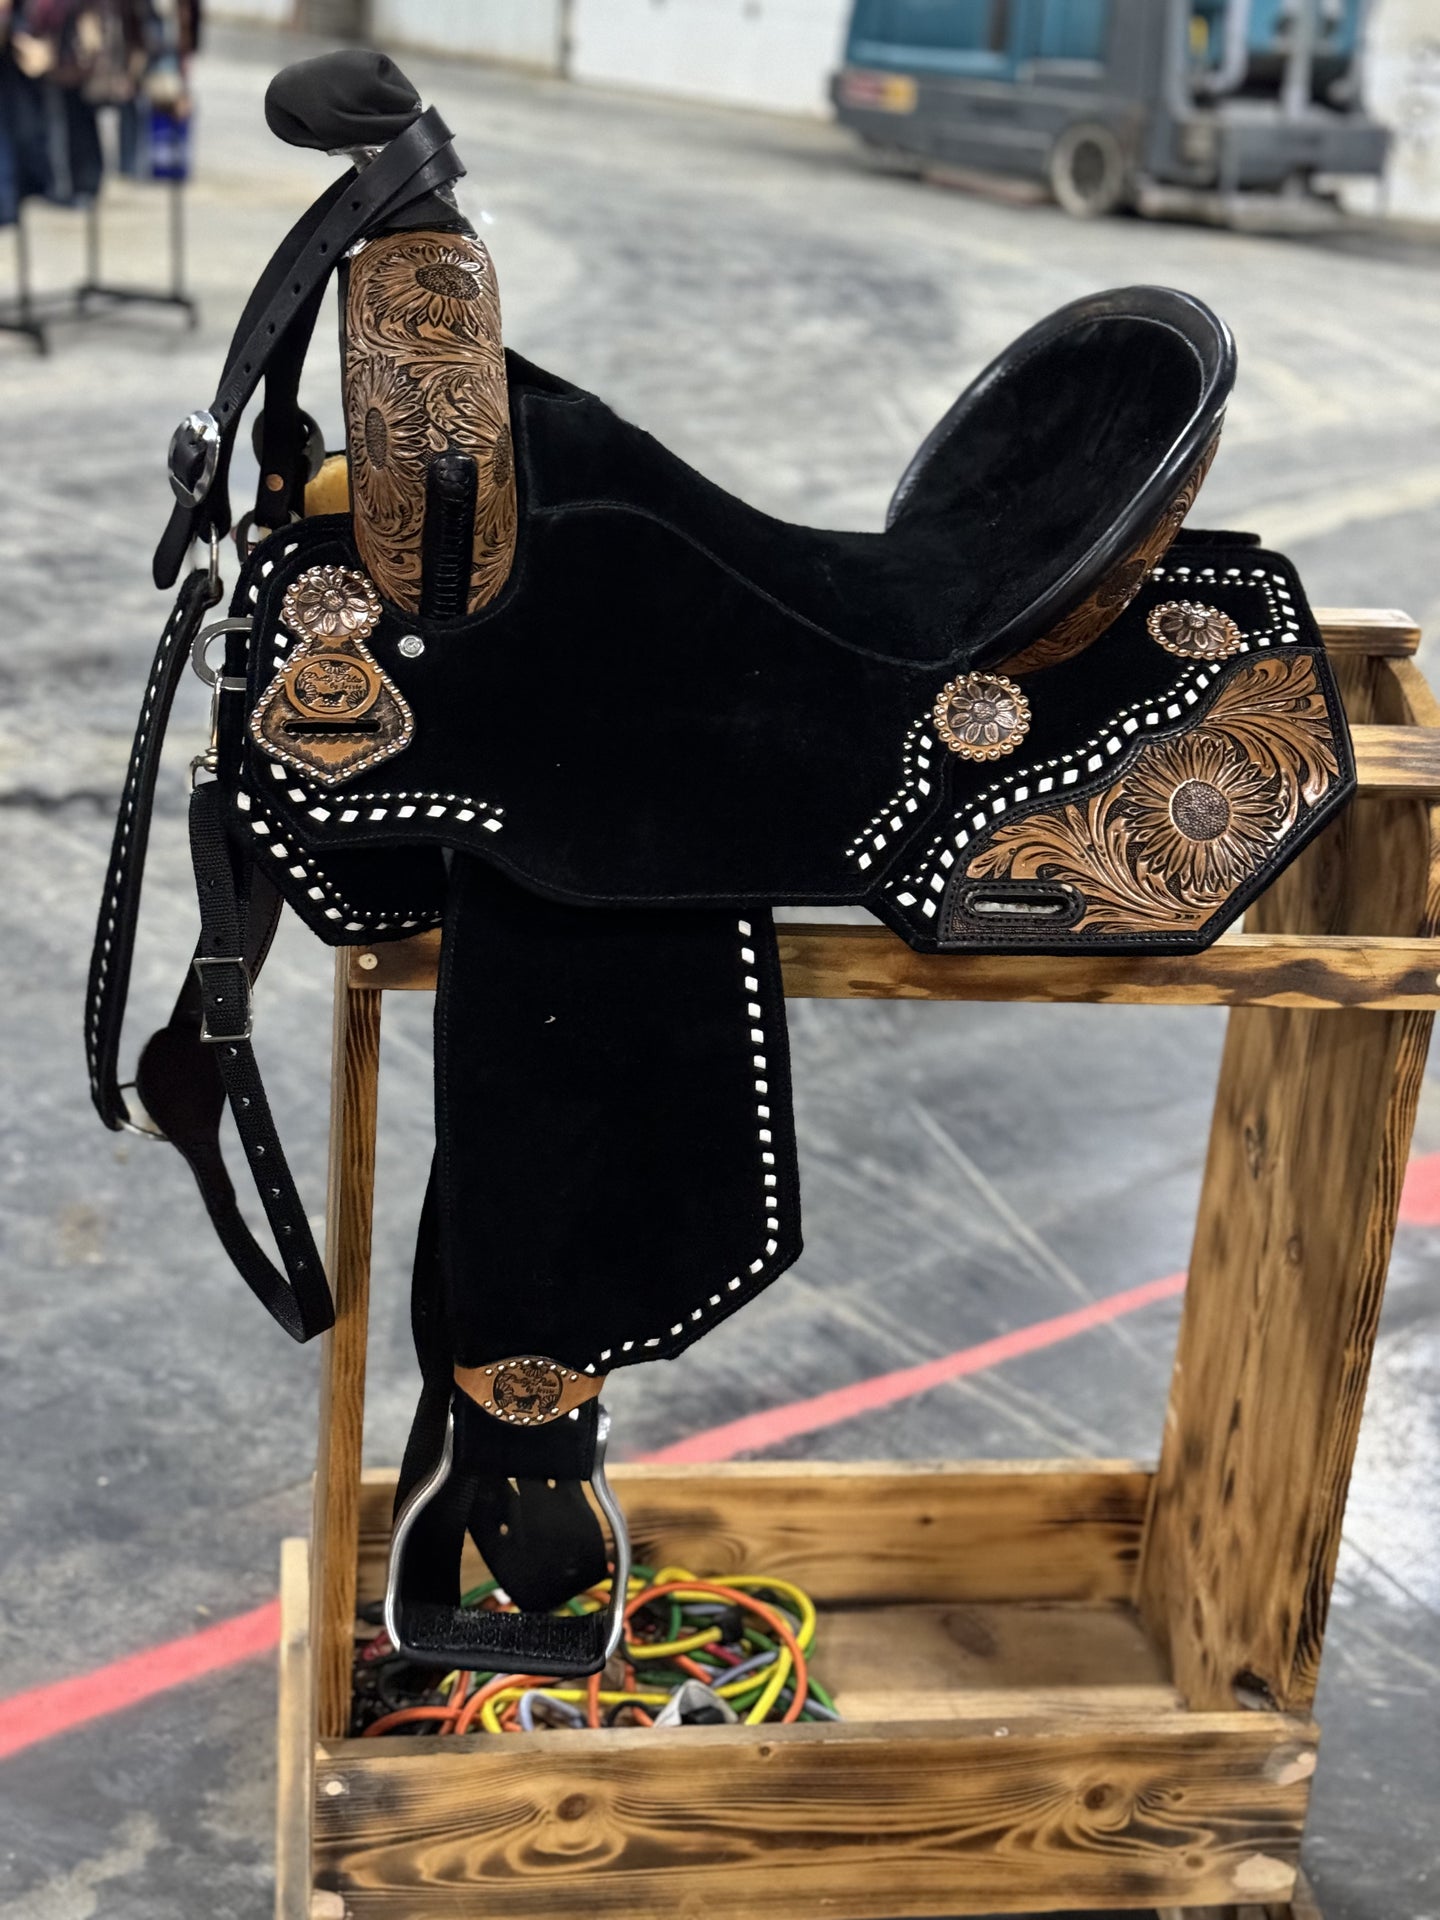 The Molly Lightweight Saddle